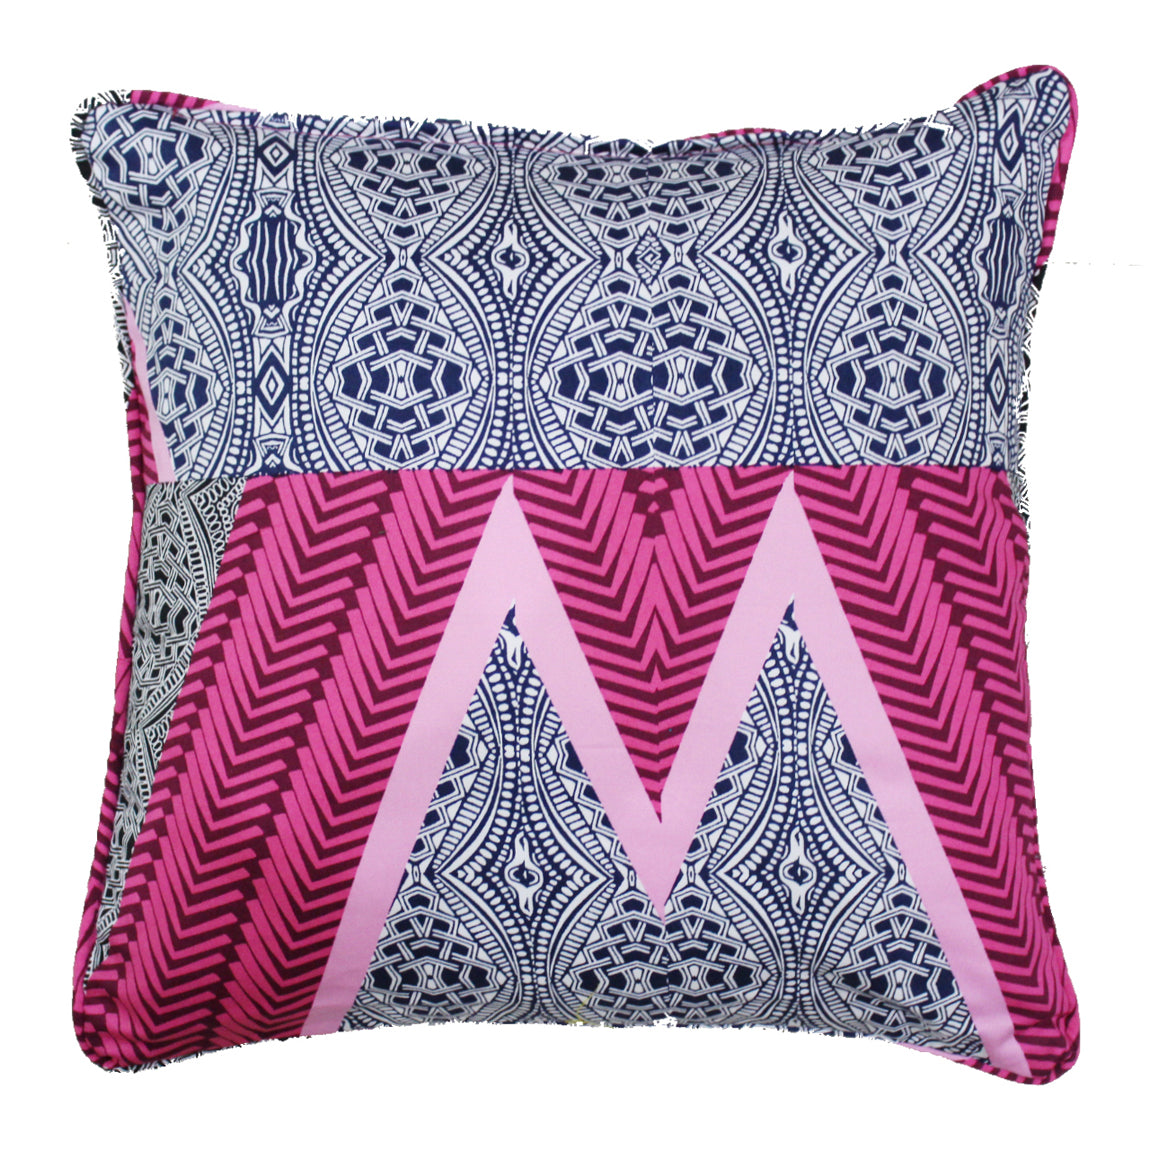 Quartz Printed Abstract Cotton Cushion Cover - Pink